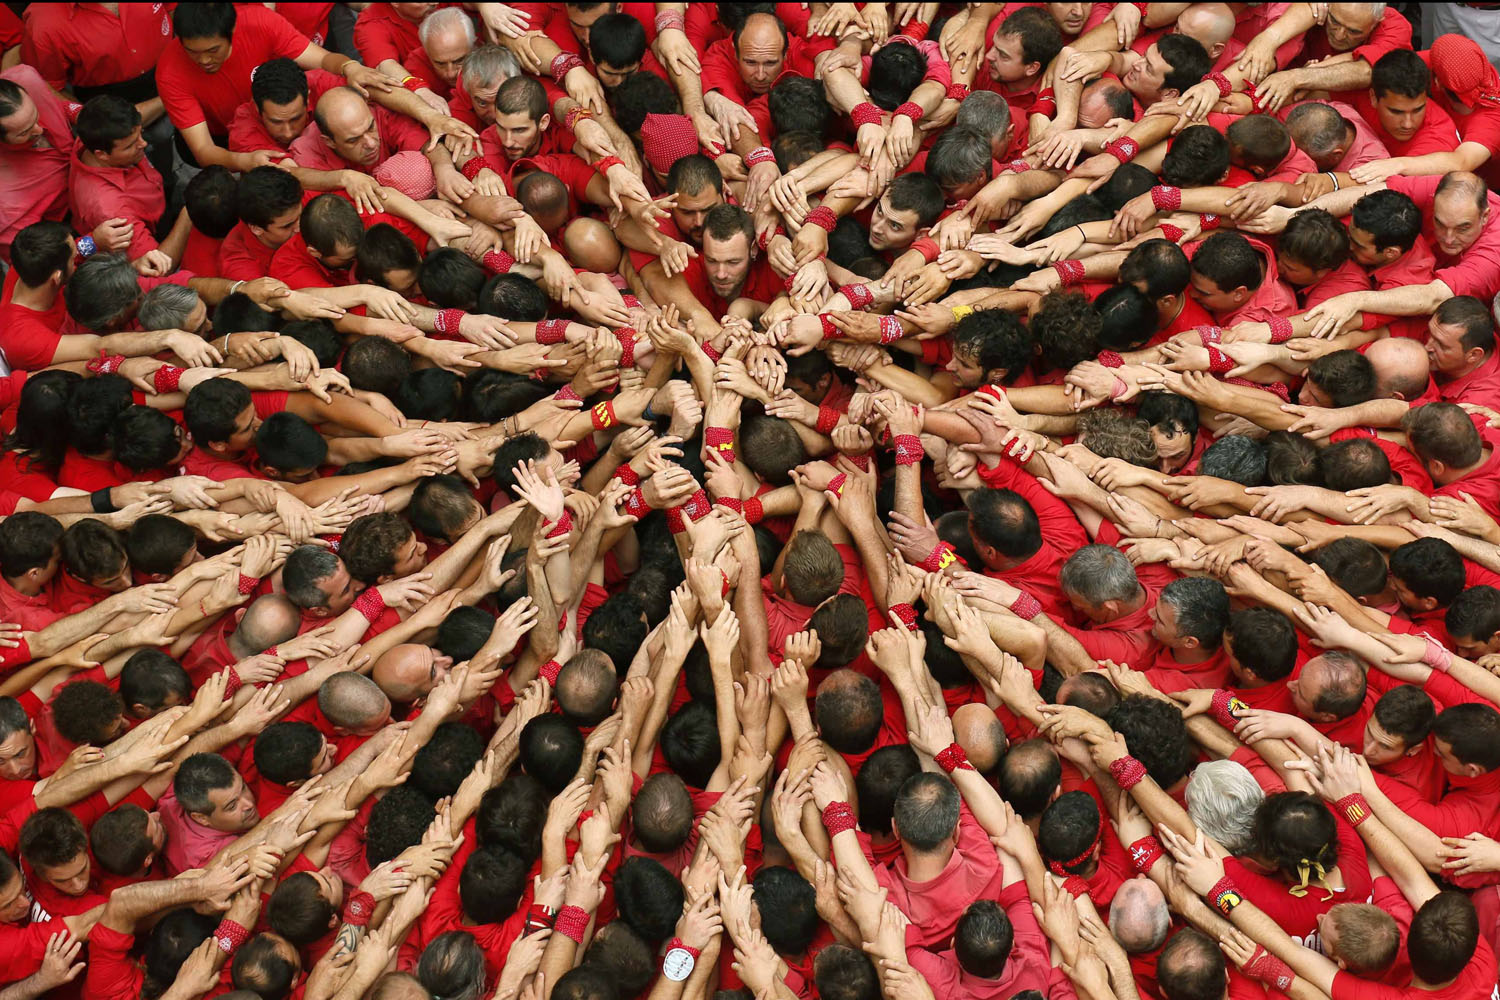 Jun. 24, 2014. Castellers Colla Joves Xiquets de Valls start to form a human tower called  castells  during the Sant Joan festival at Plaza del Blat square in Valls, south of Barcelona.